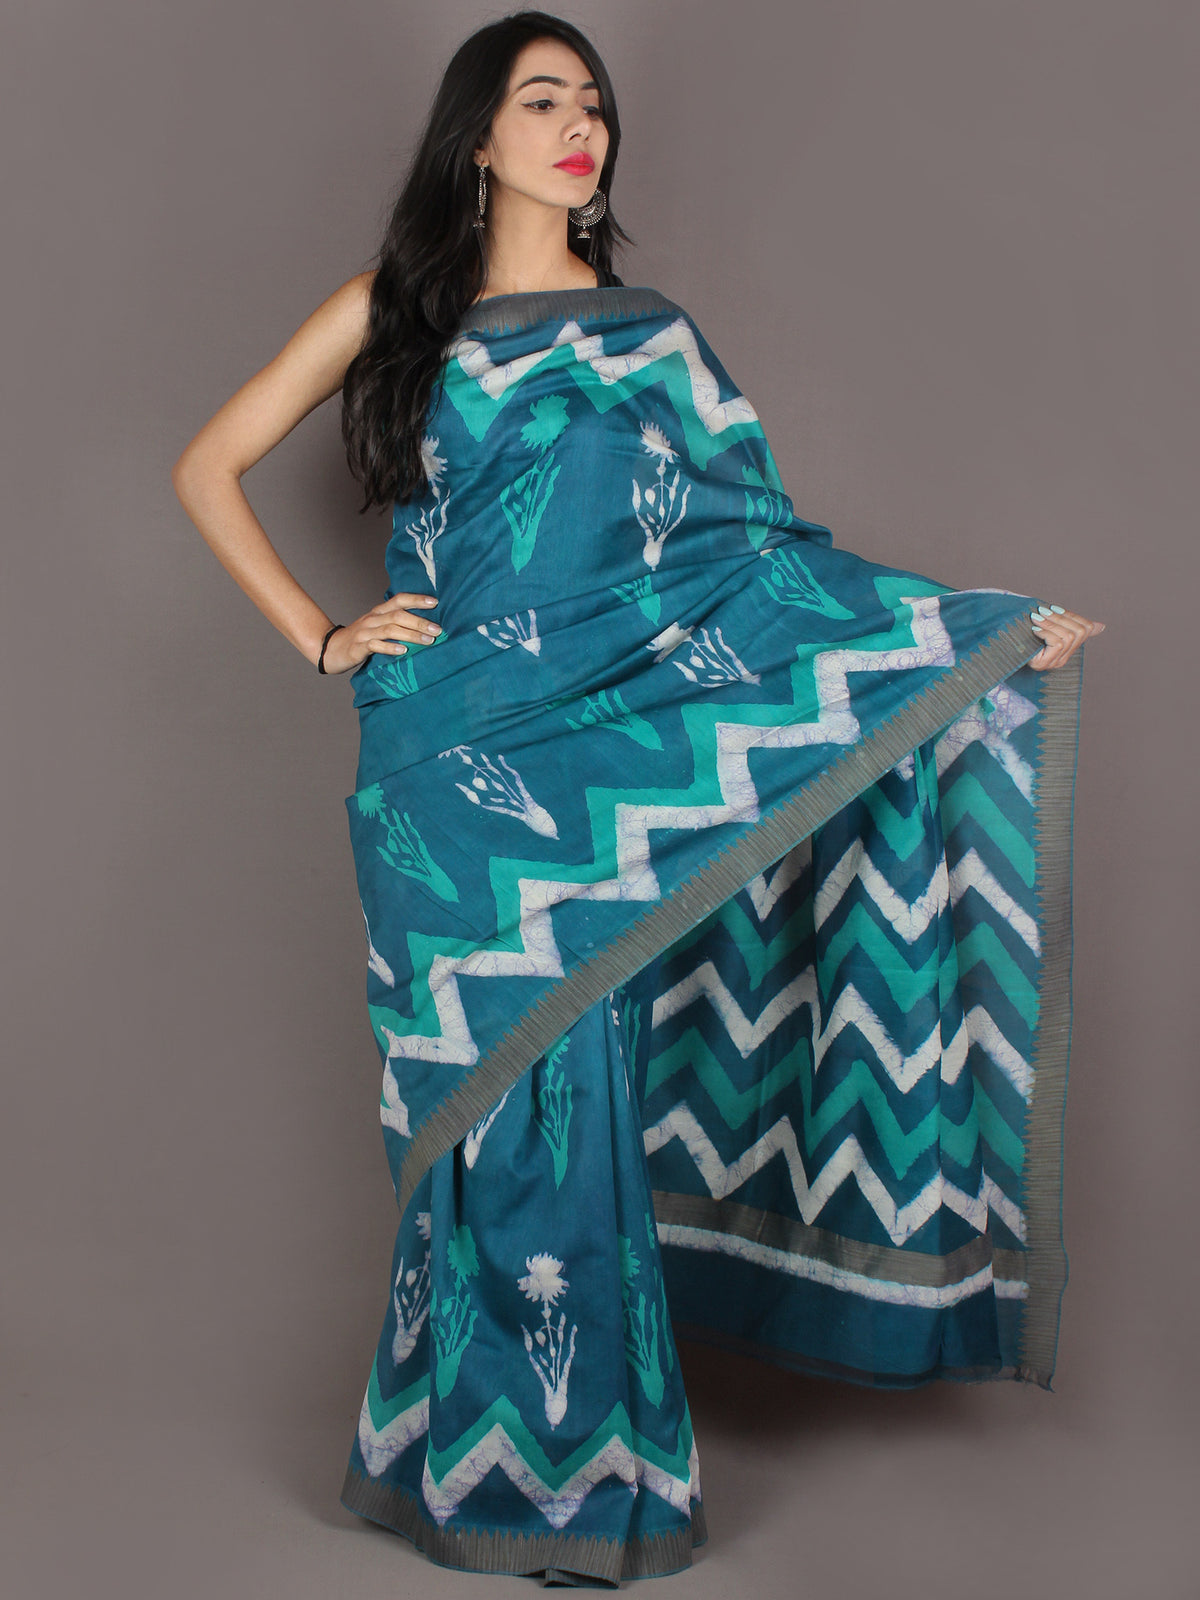 Teal Blue White Hand Block Printed in Natural Colors Chanderi Saree With Geecha Border - S031701001